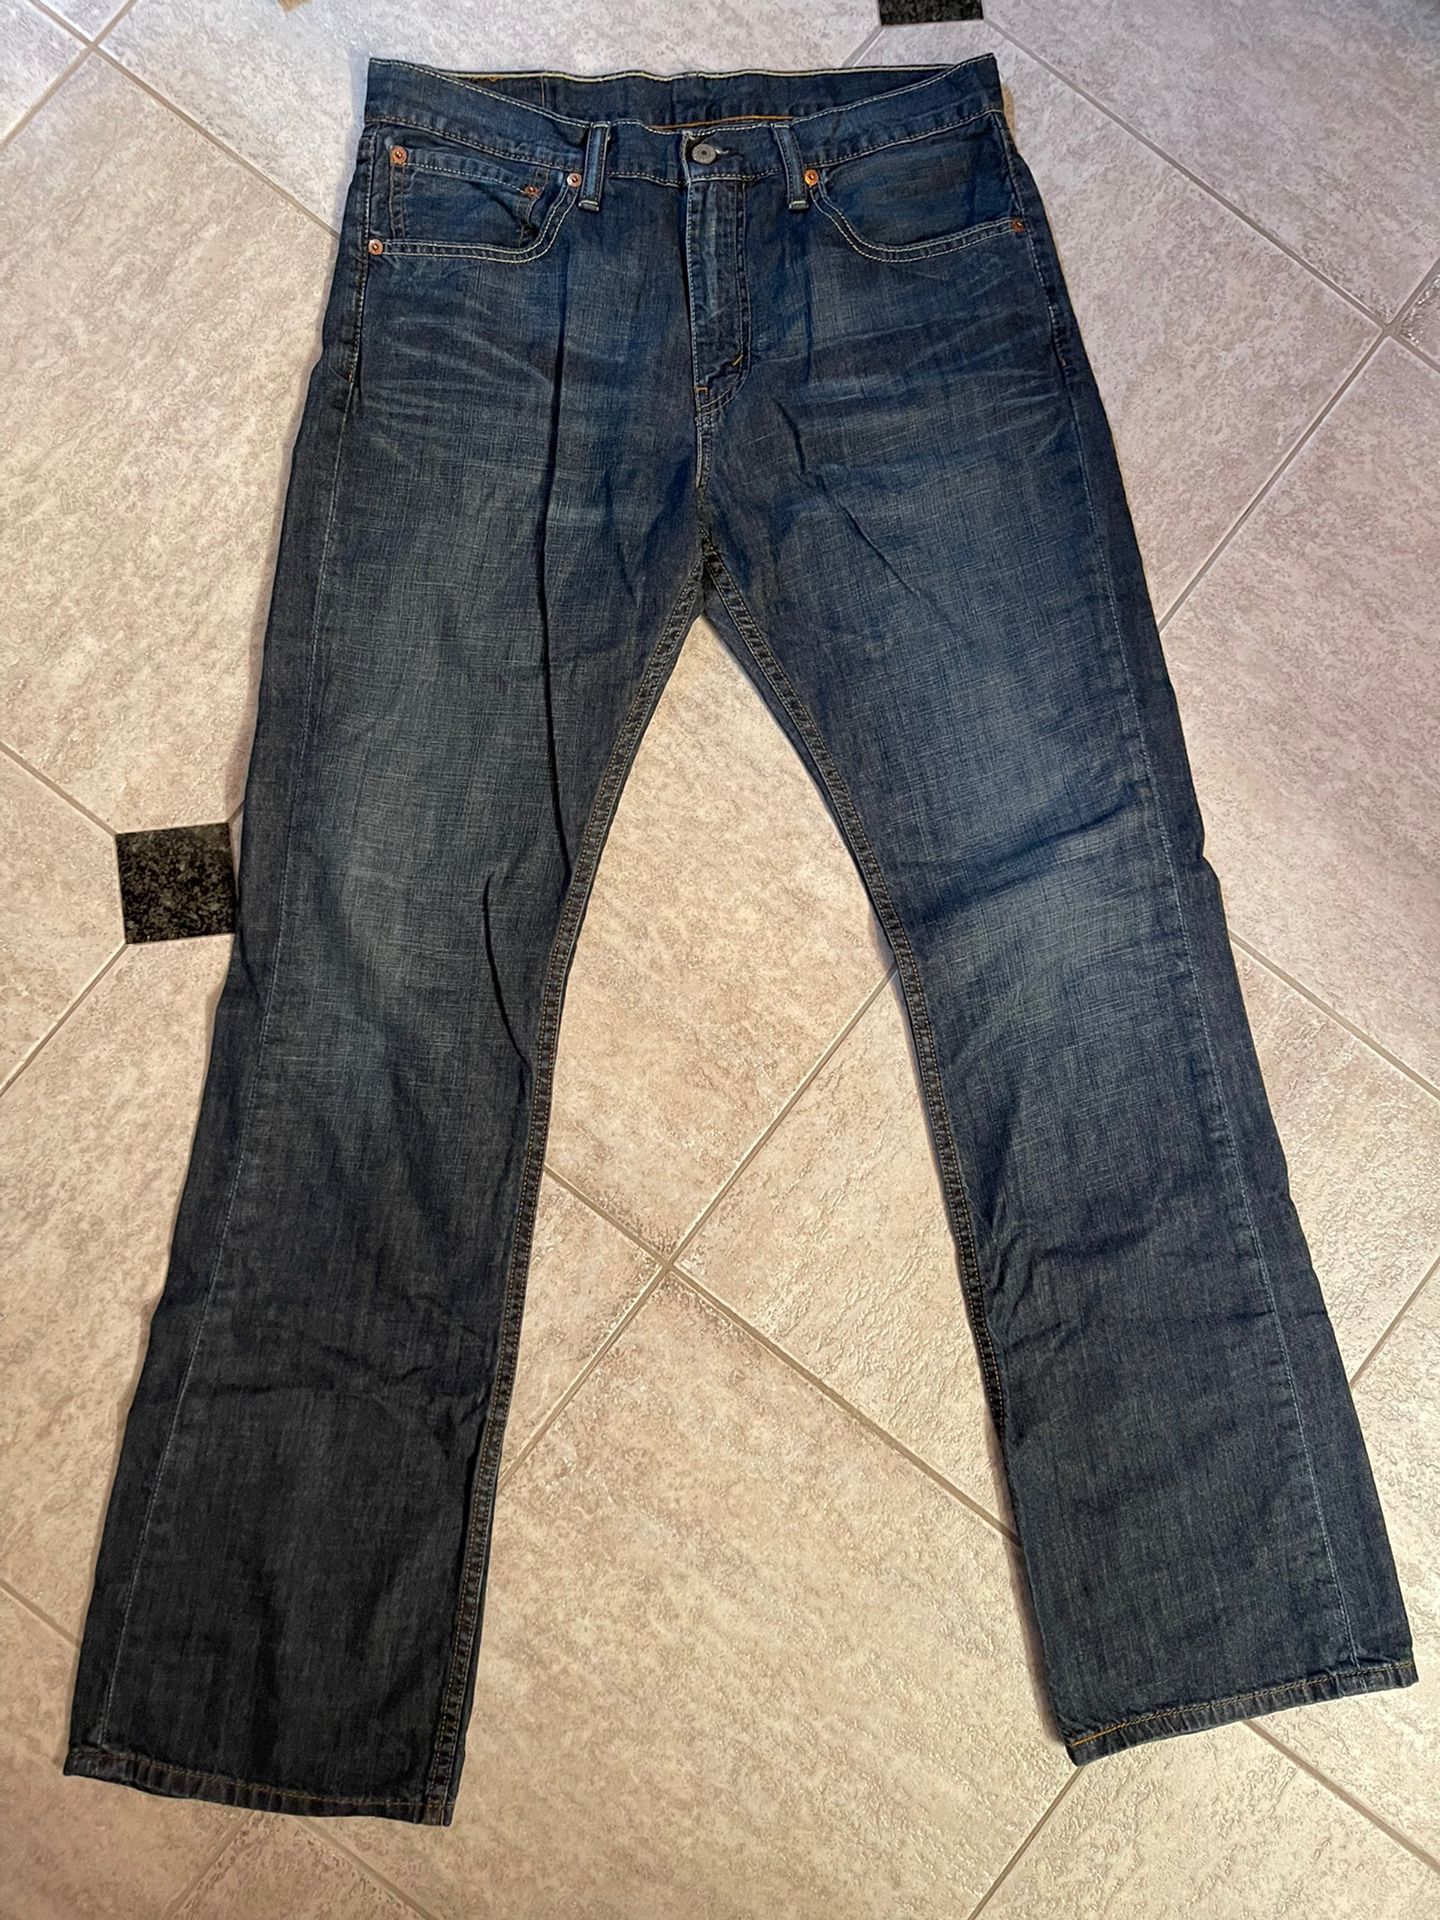 Mens 527 Levi’s Size 34x34 Great Condition 